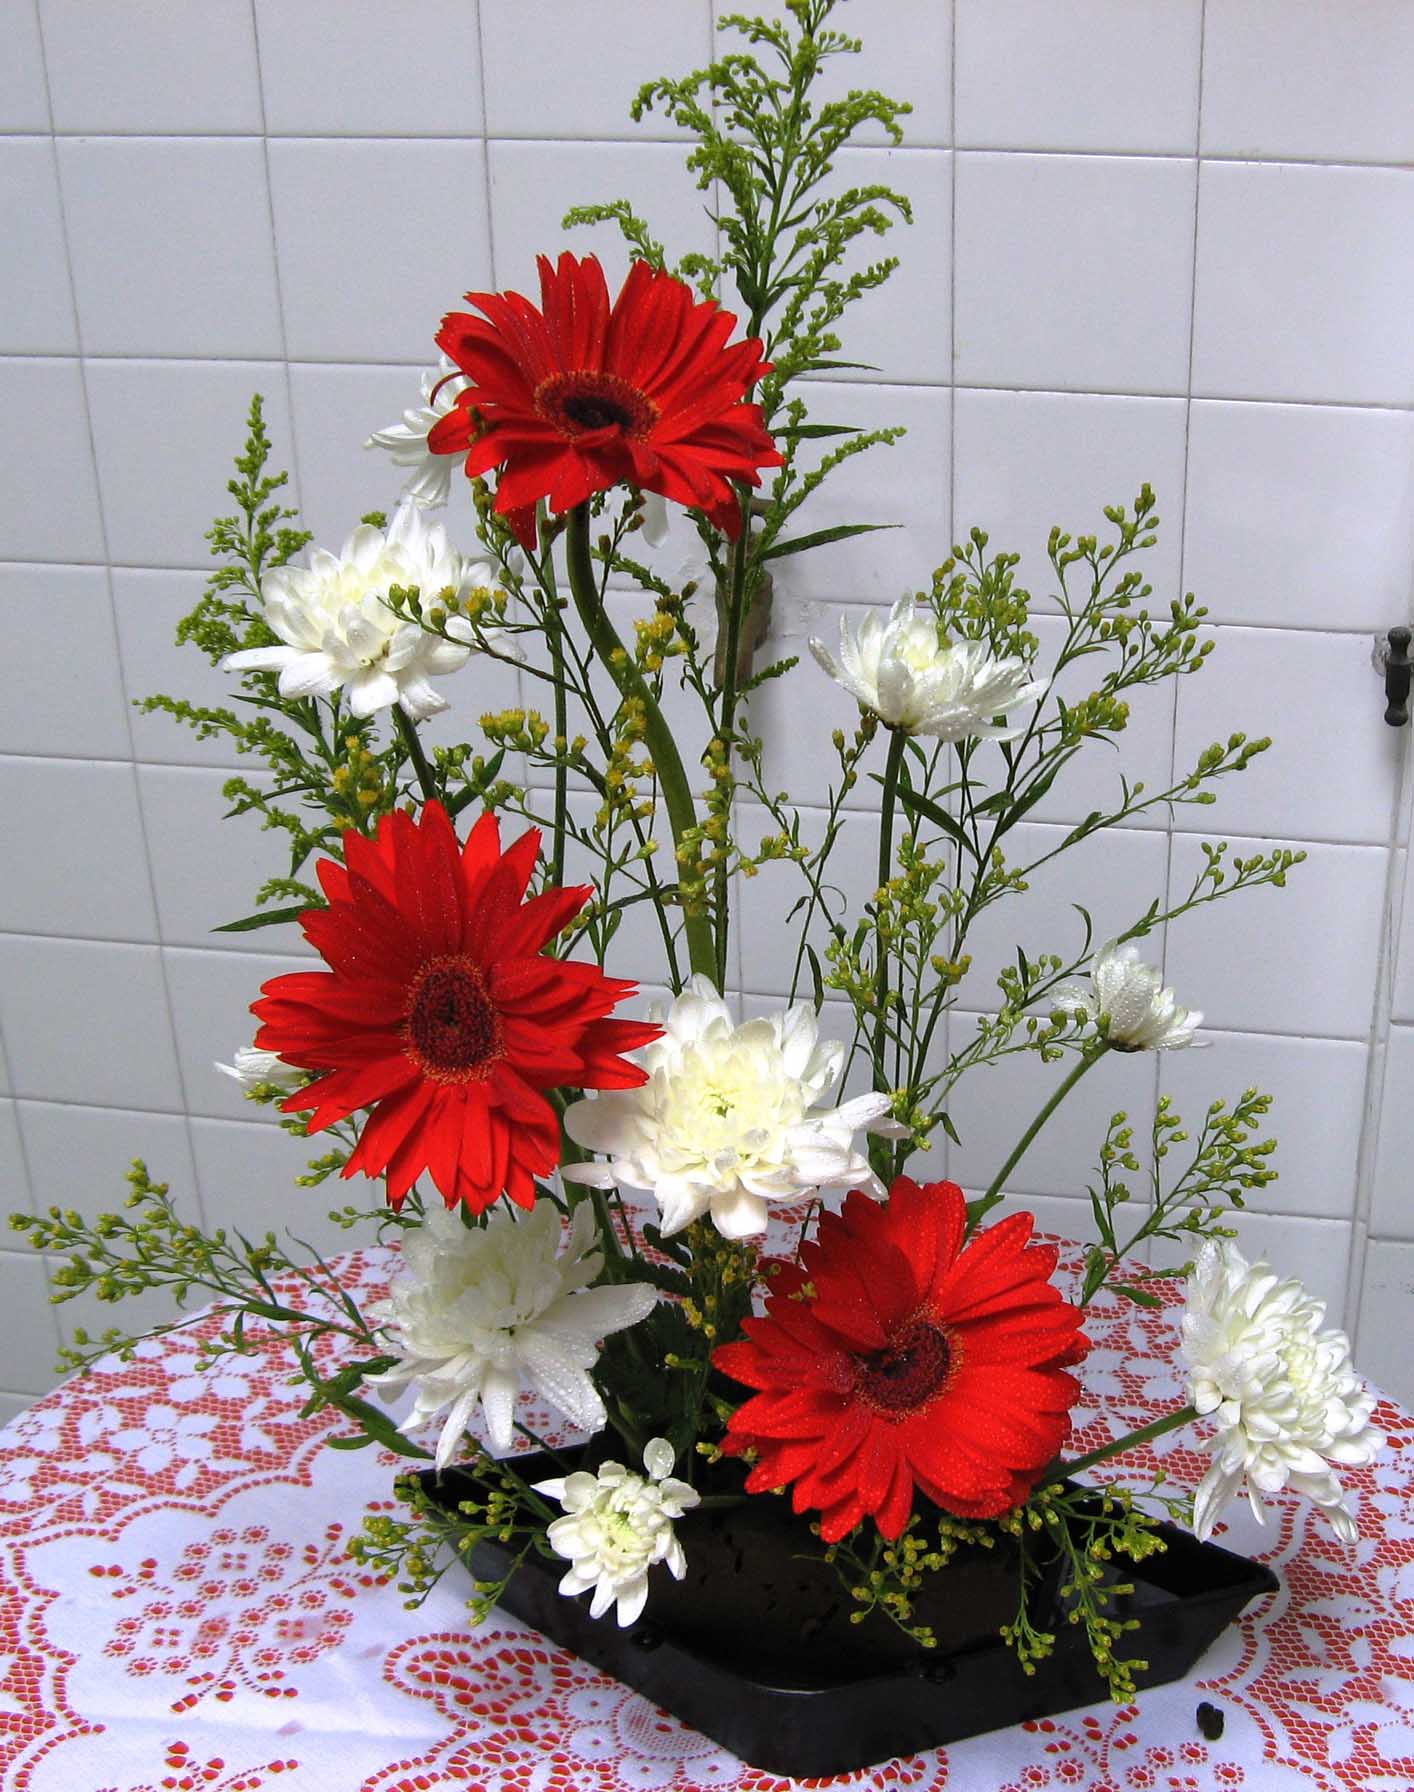 The Art Of Flower Arrangement And The Beauty Of It - Bored Art